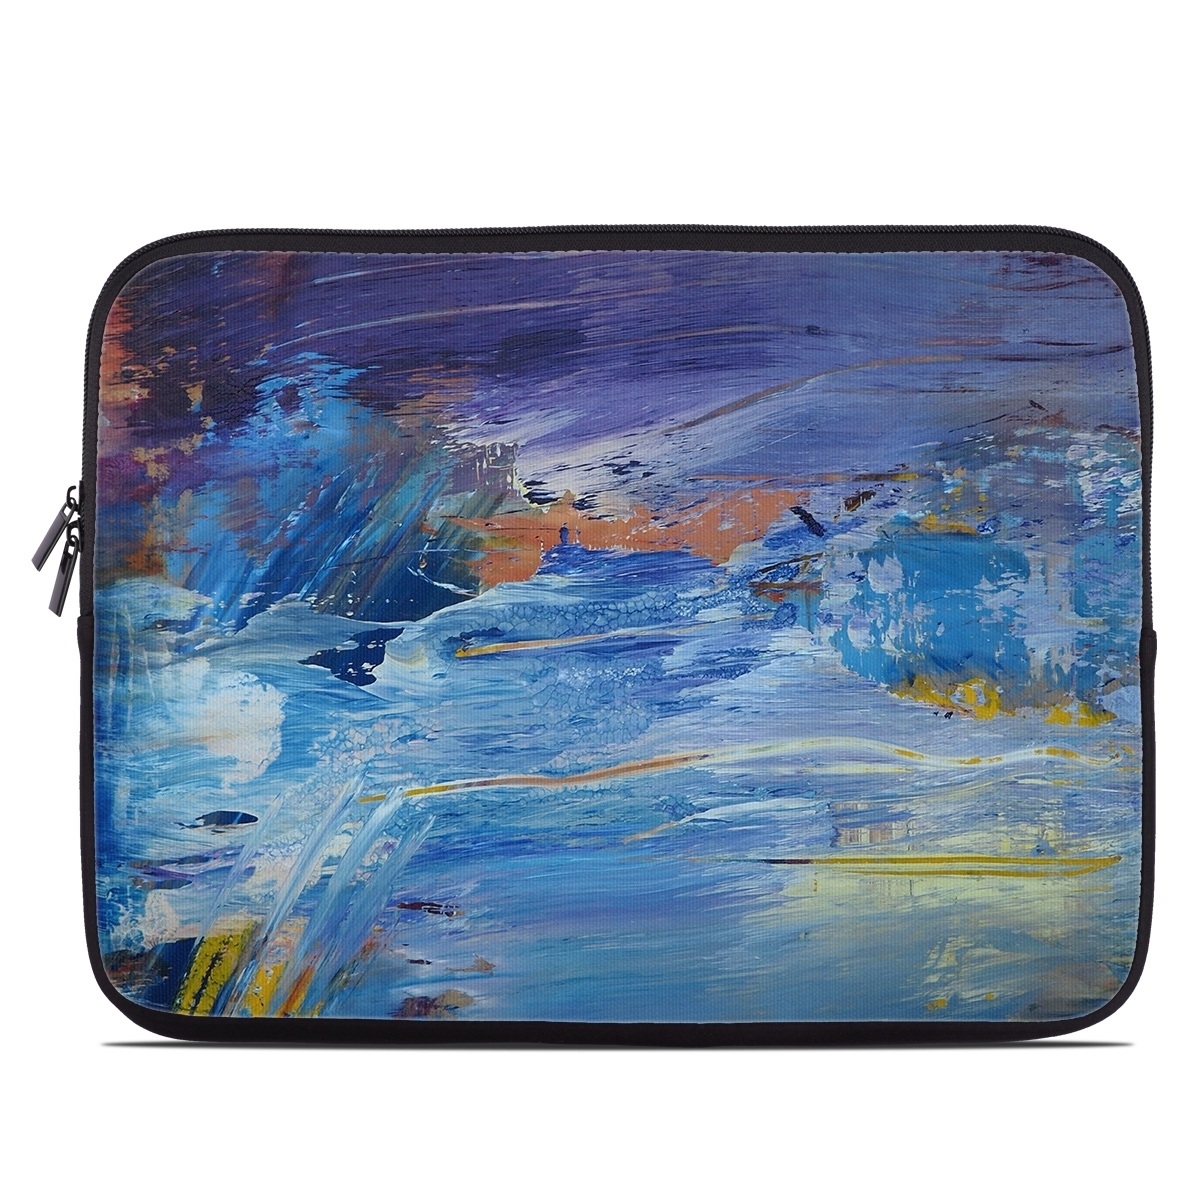 Laptop Sleeve - Abyss (Image 1)